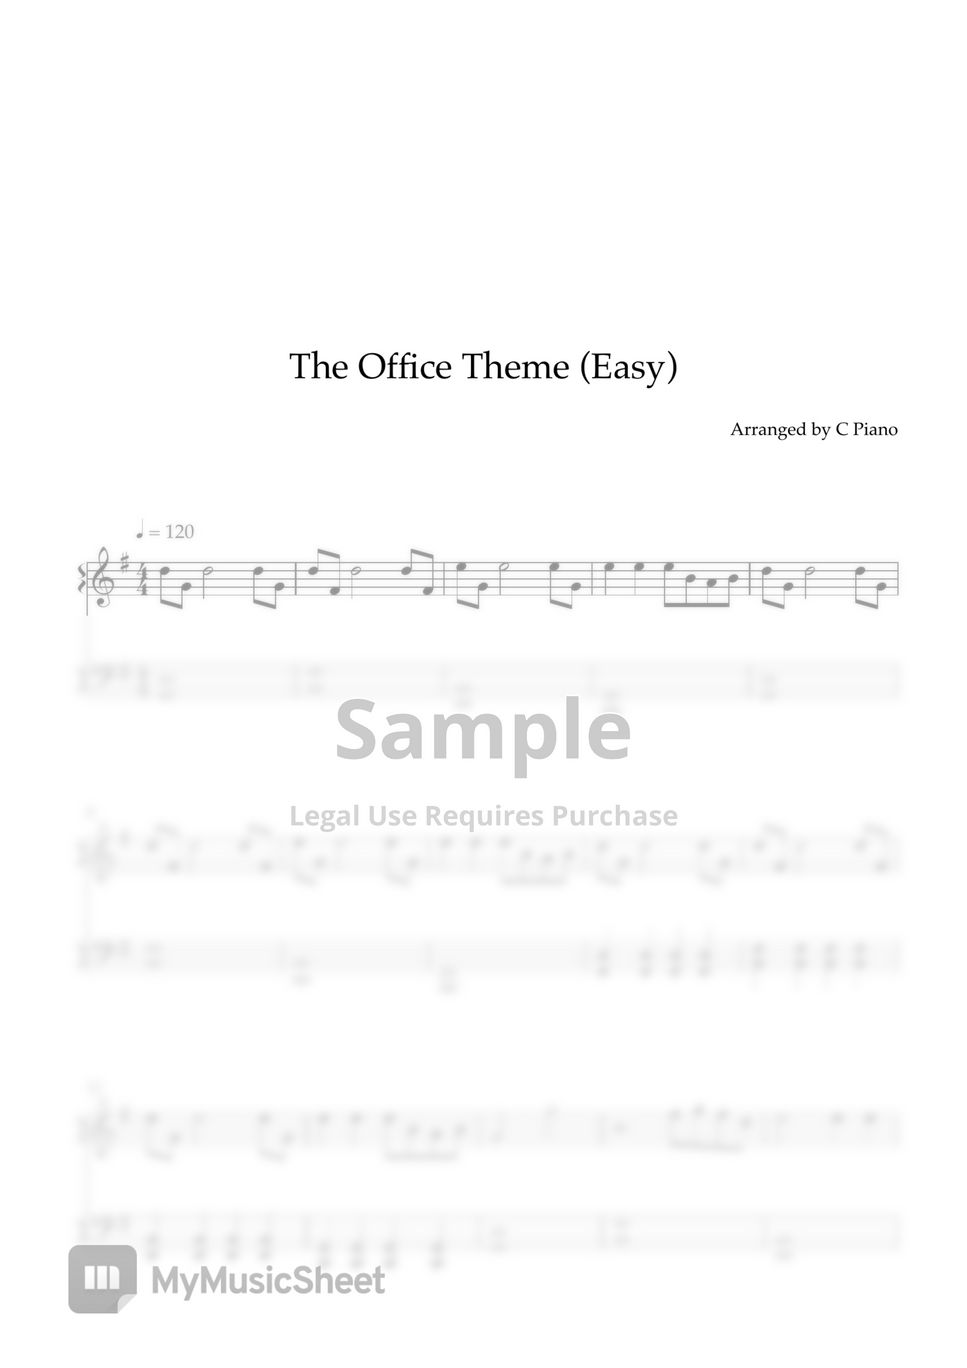 Jay Ferguson - The Office Theme (Easy Version) by C Piano